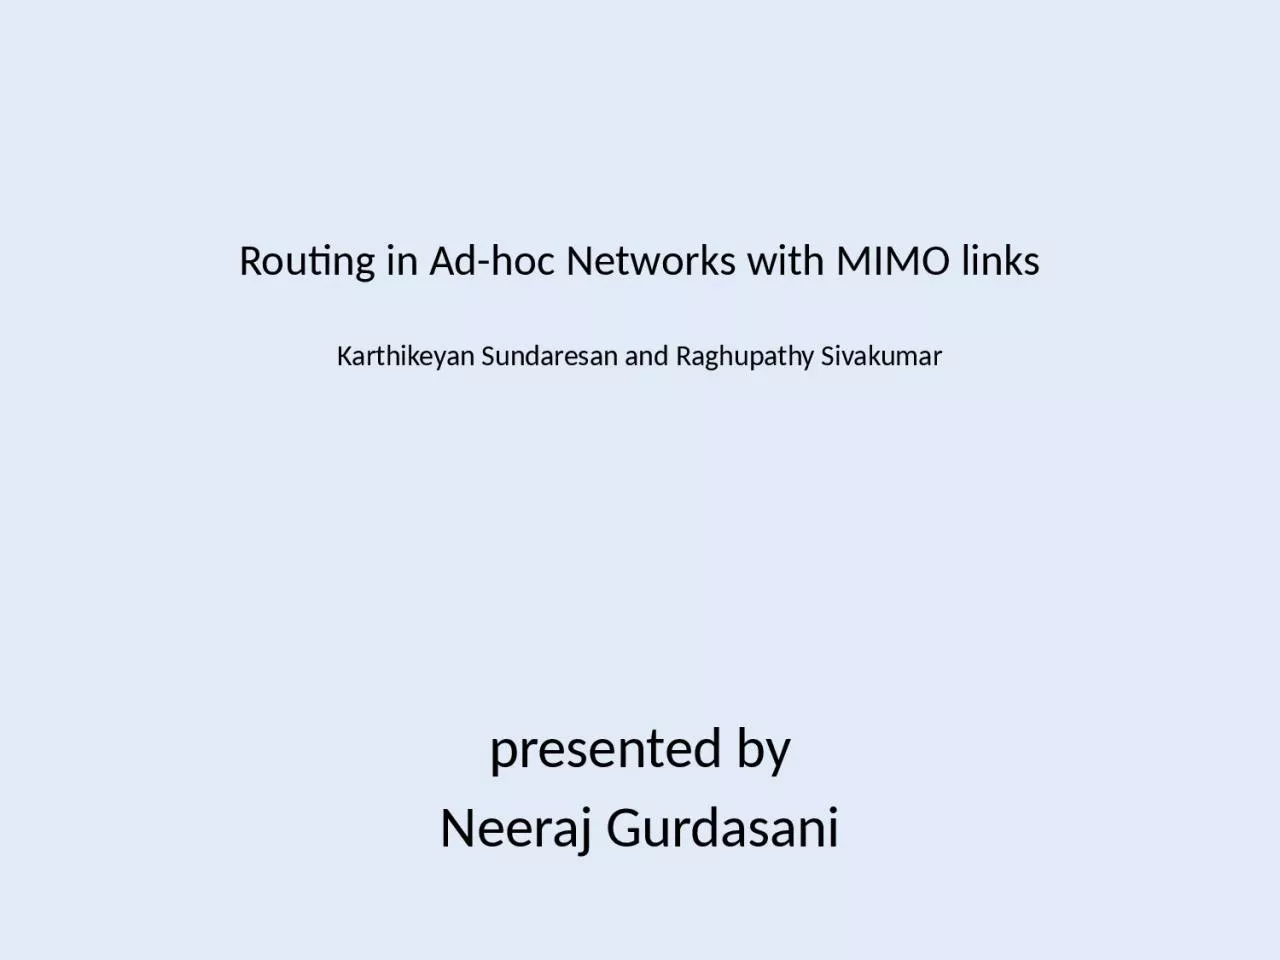 Routing in Ad-hoc Networks with MIMO links